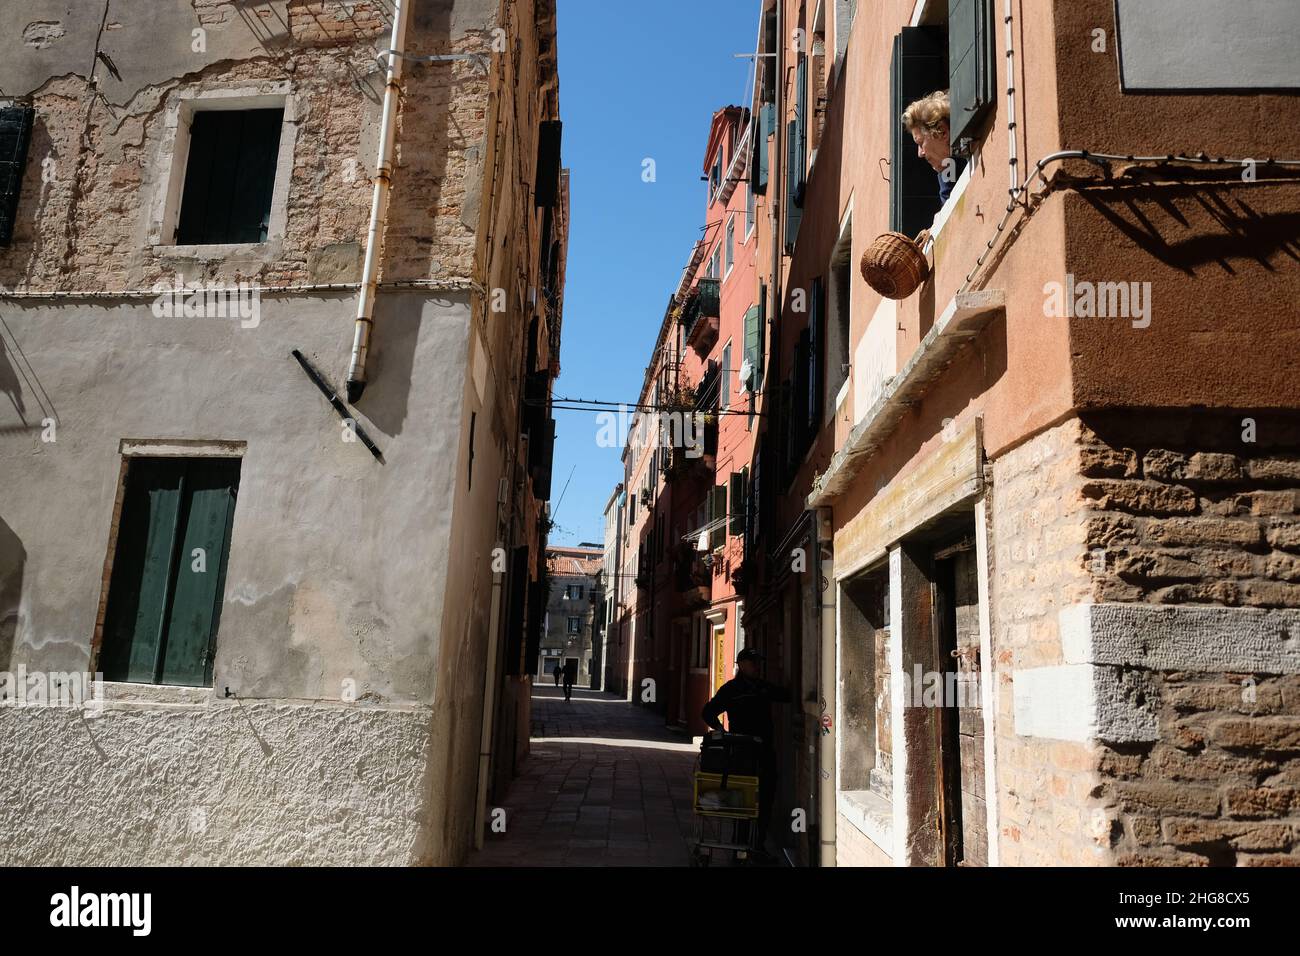 Venice deserted  during lockdown in an unprecedented clampdown aimed at beating the coronavirus, in Venice, Italy, April 8, 2020. (MvS) Stock Photo